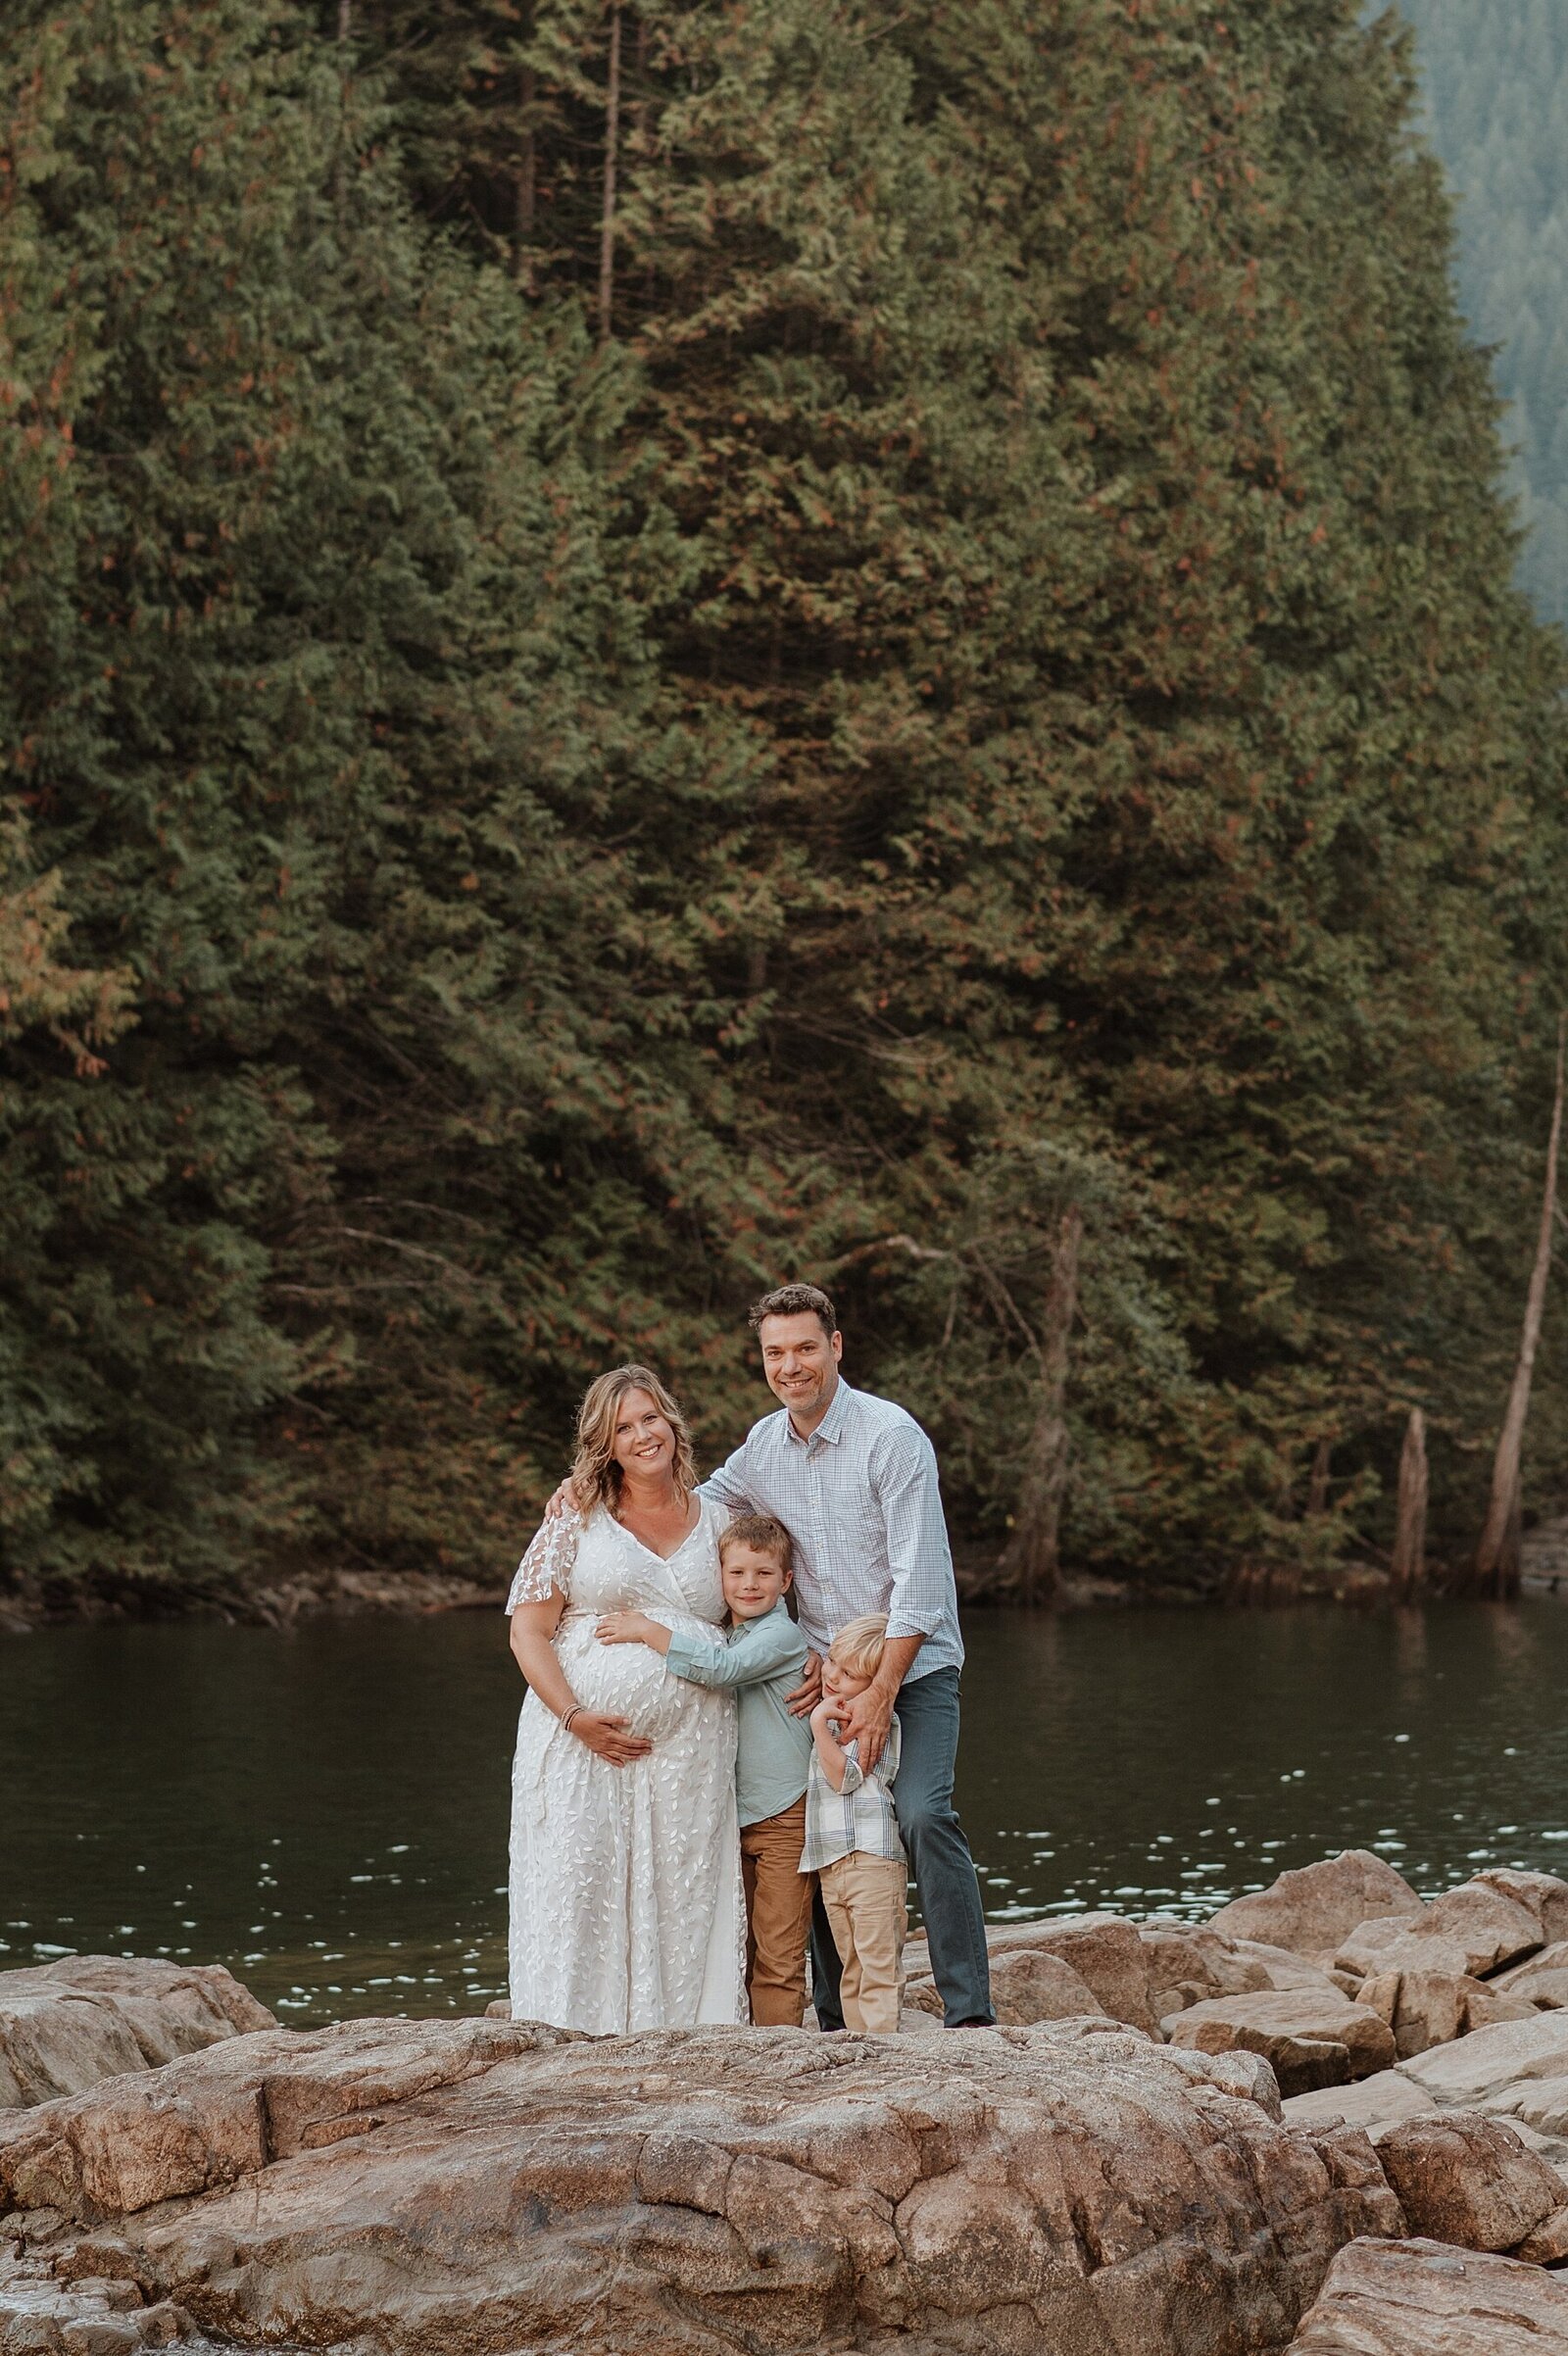 Maternity Photography Vancouver: In the Water - Kindred Photography